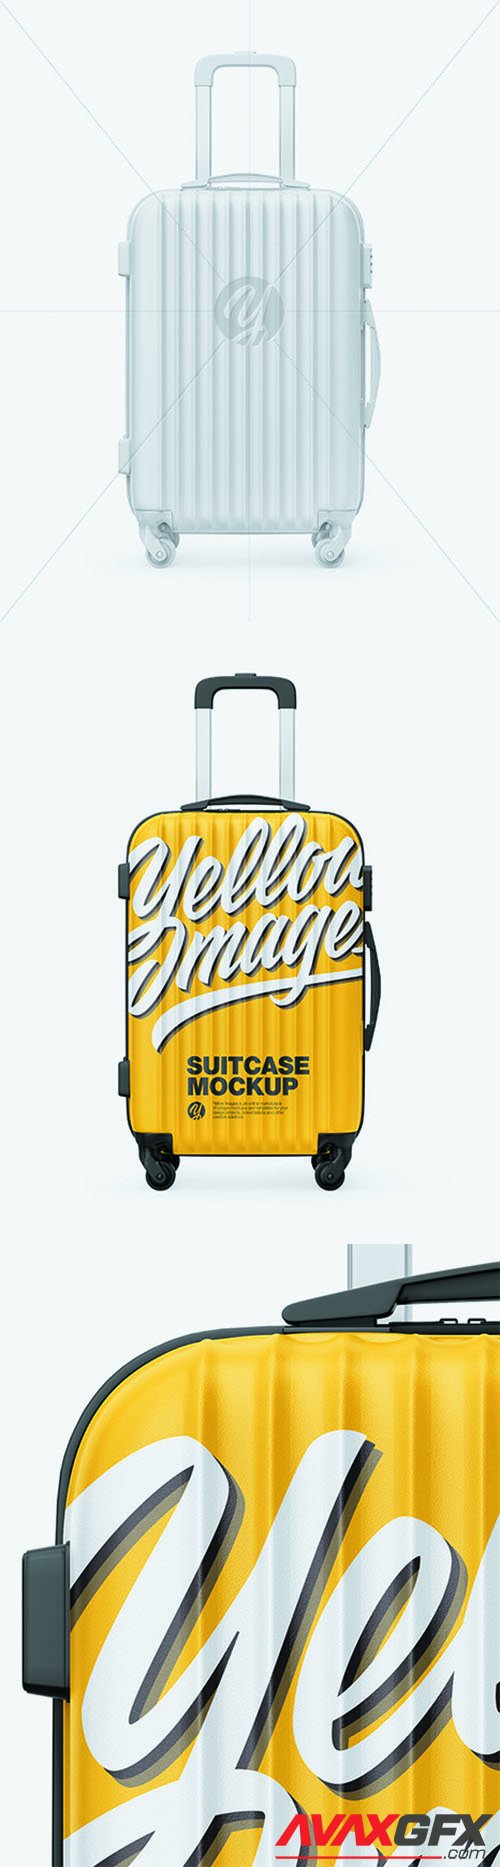 Travel Suitcase Mockup - Front View 68751